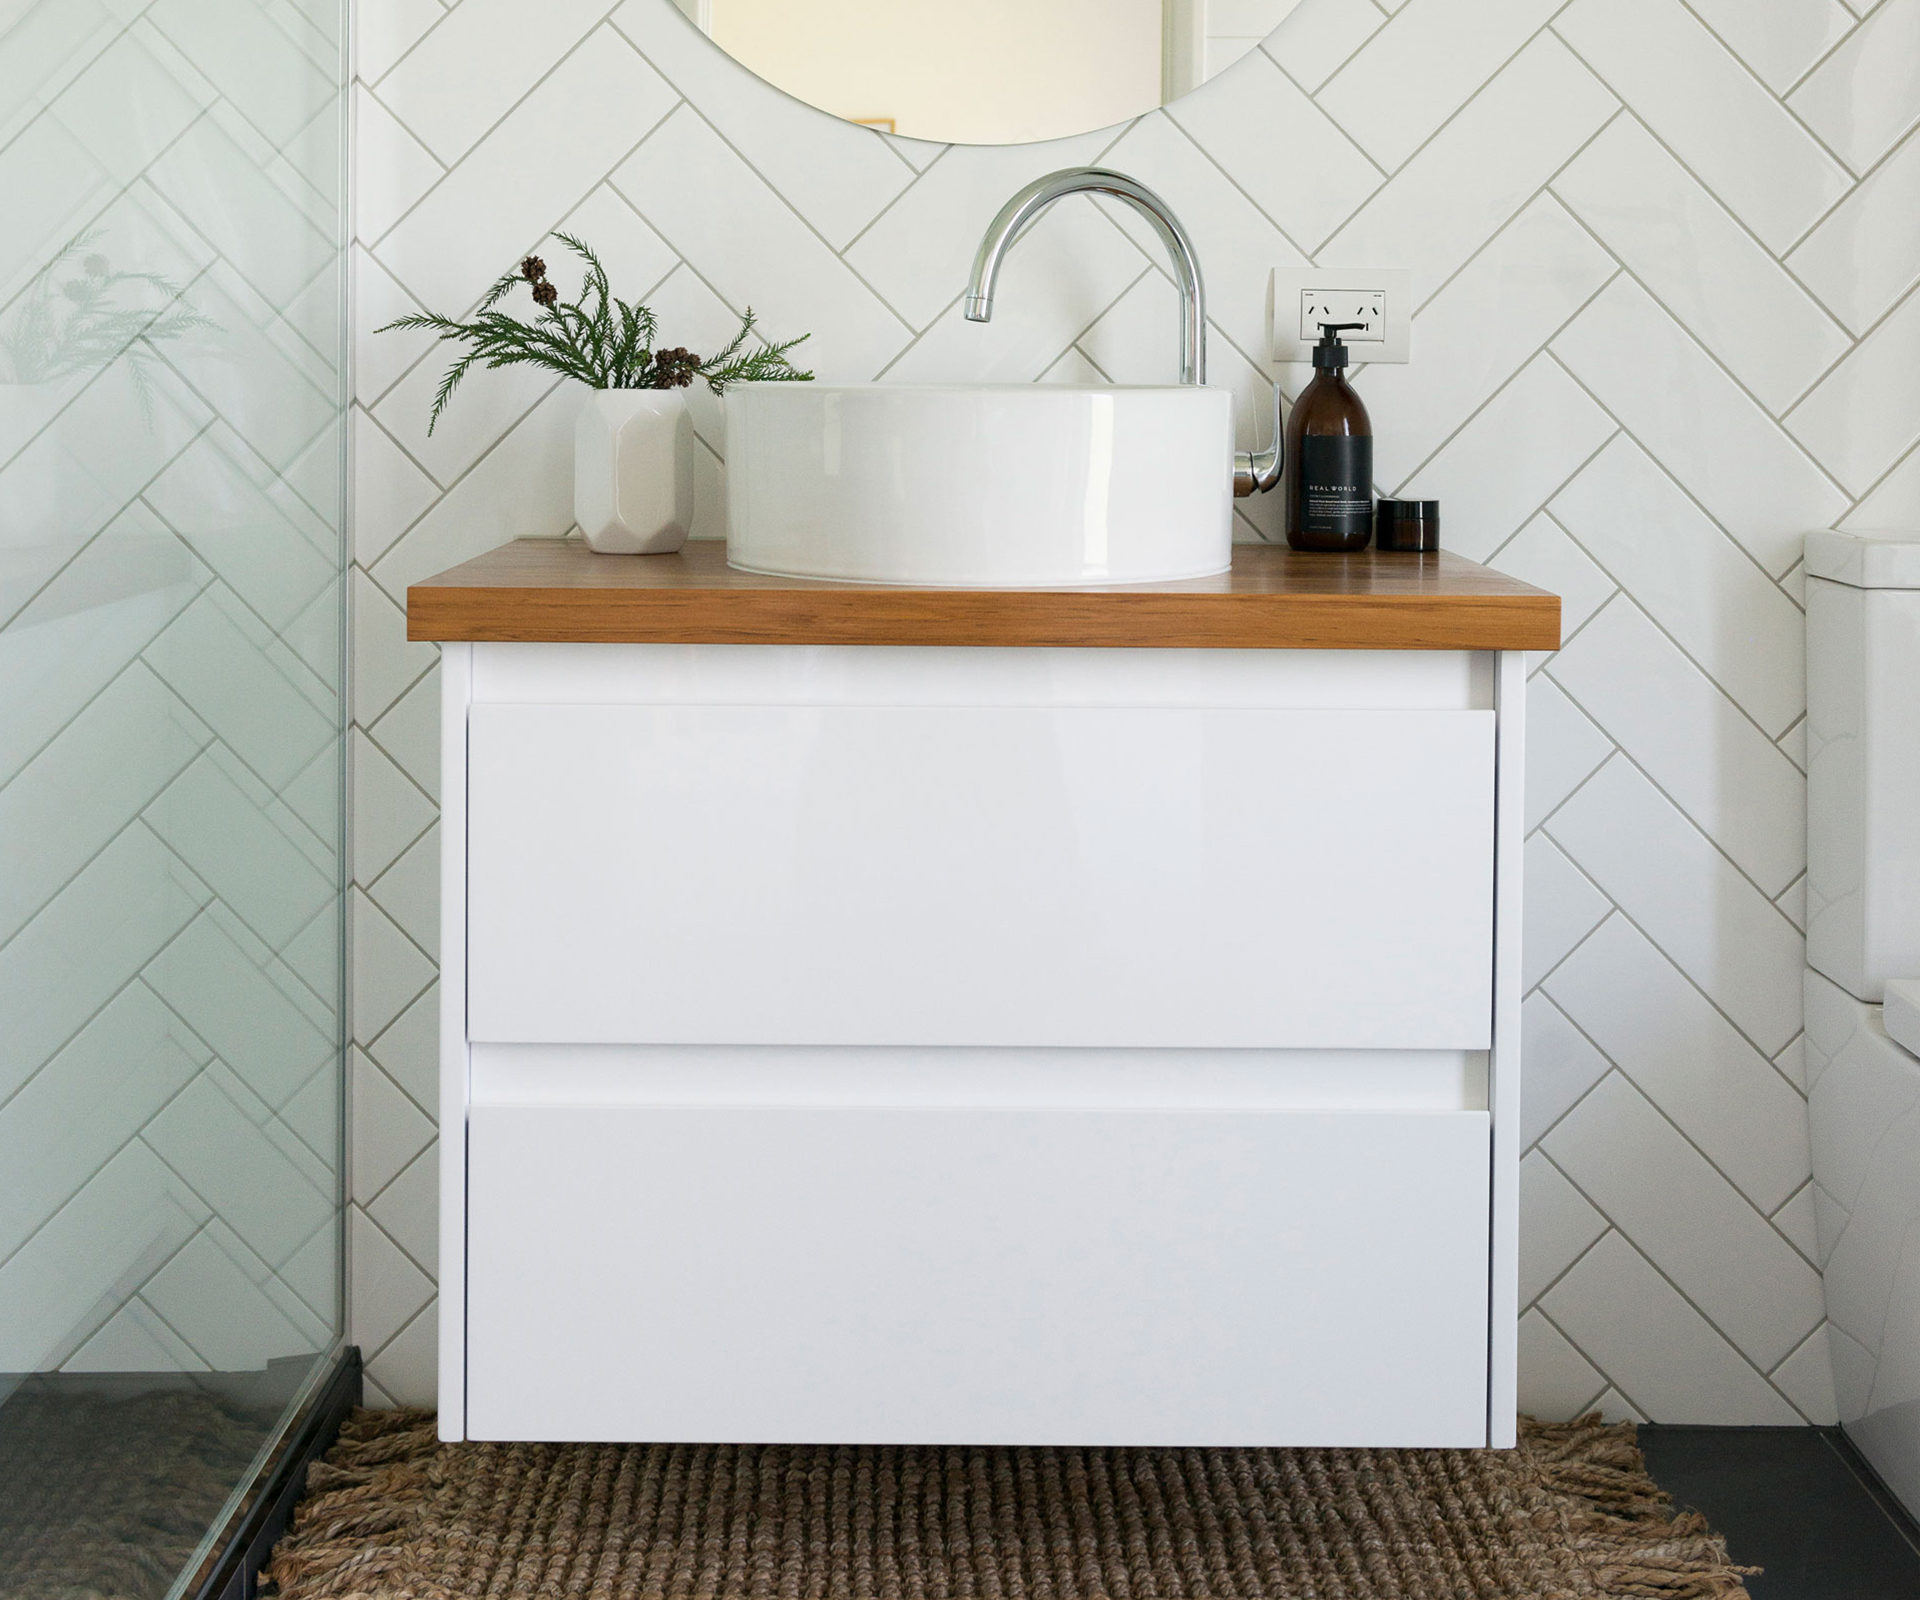 5 Best Bathroom Vanity Designs To Match Your Style